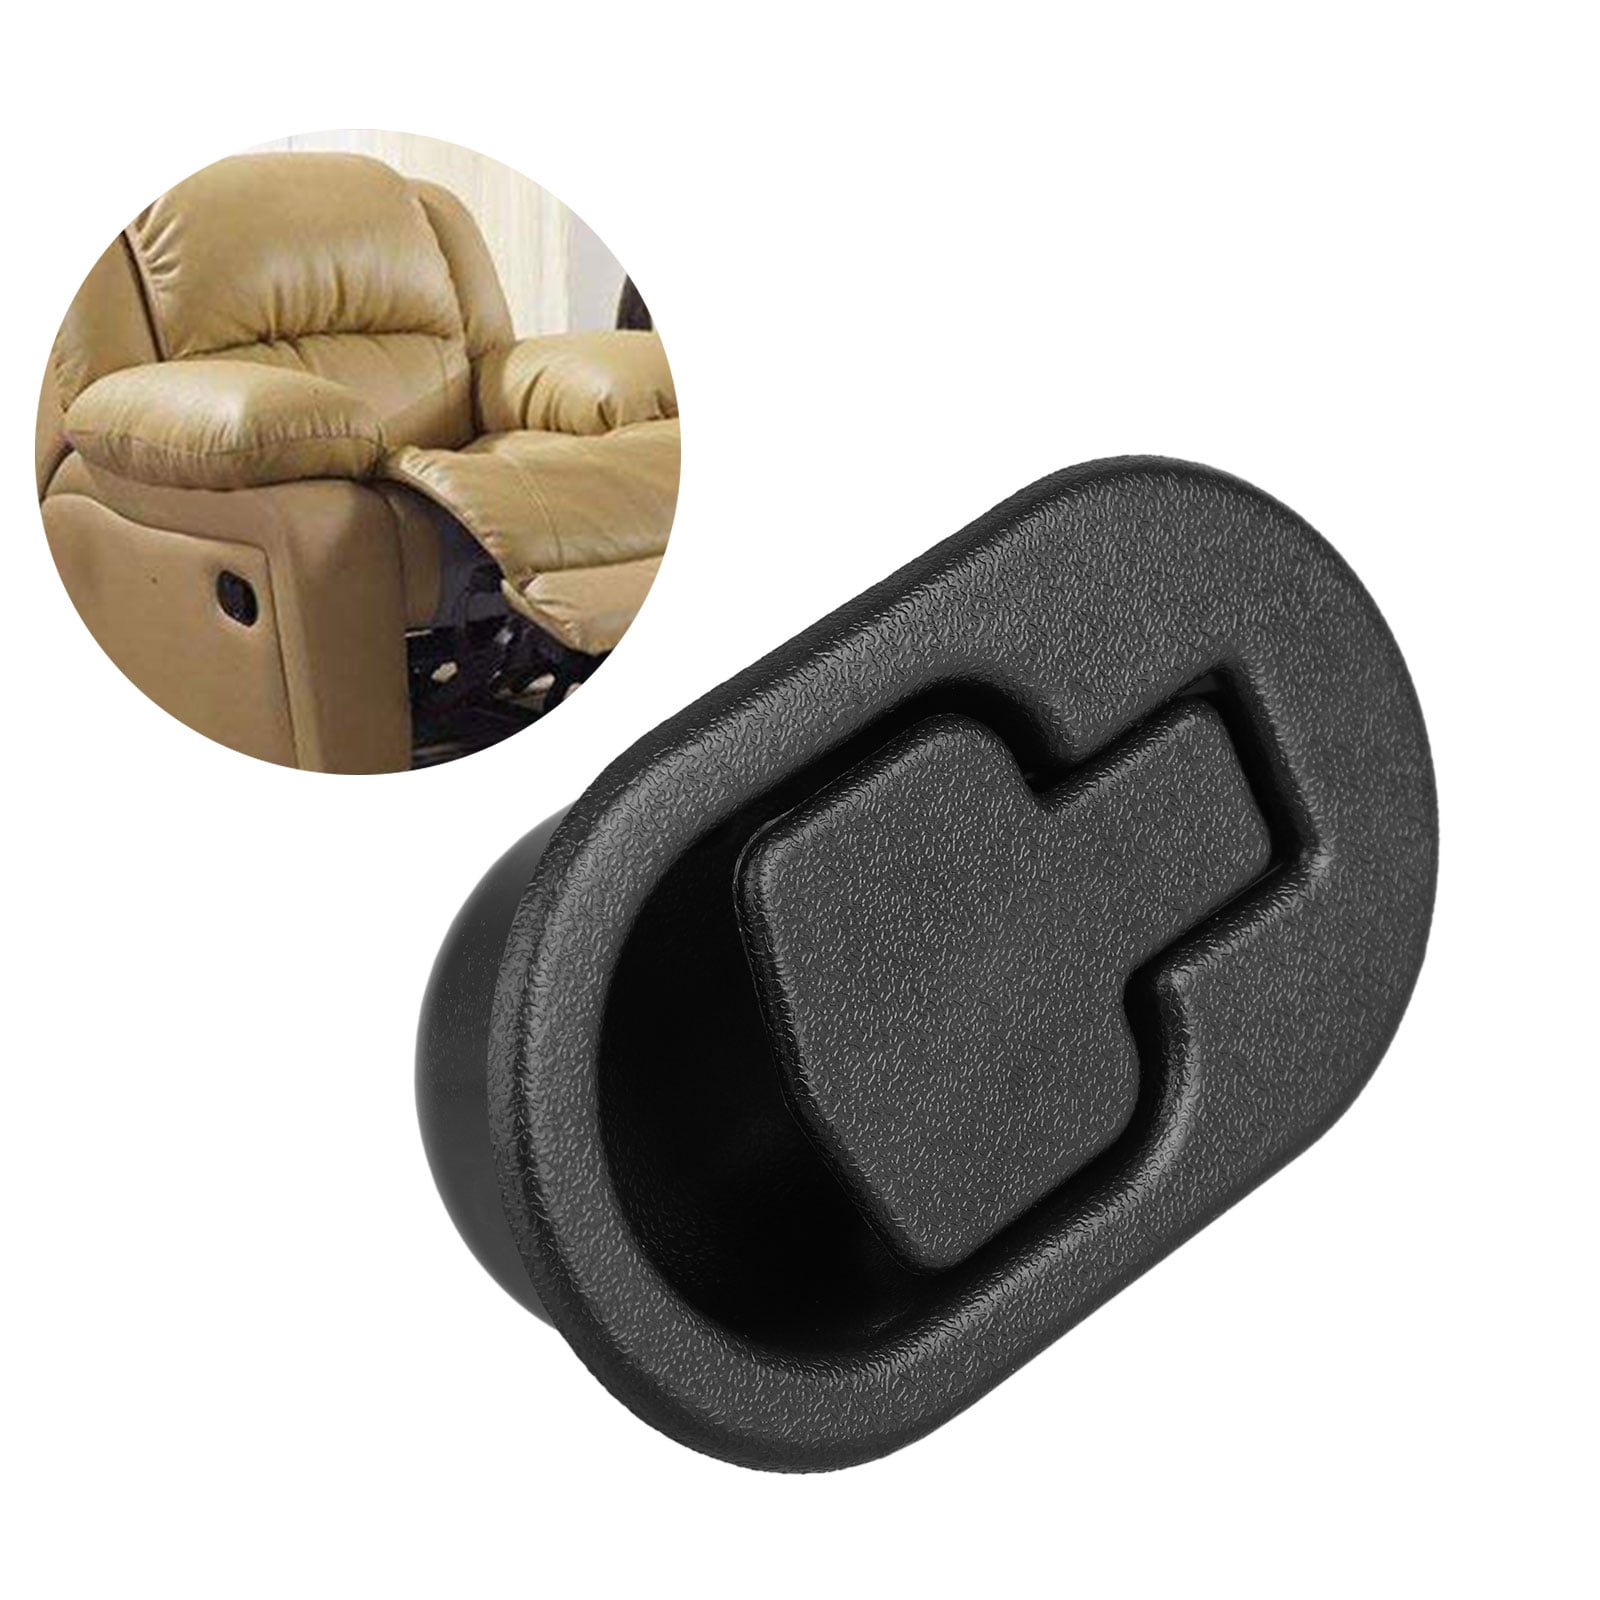 Sturdy Recliner Sofa Chair Release Oval Black Plastic Pull Handle Fits Ashley 